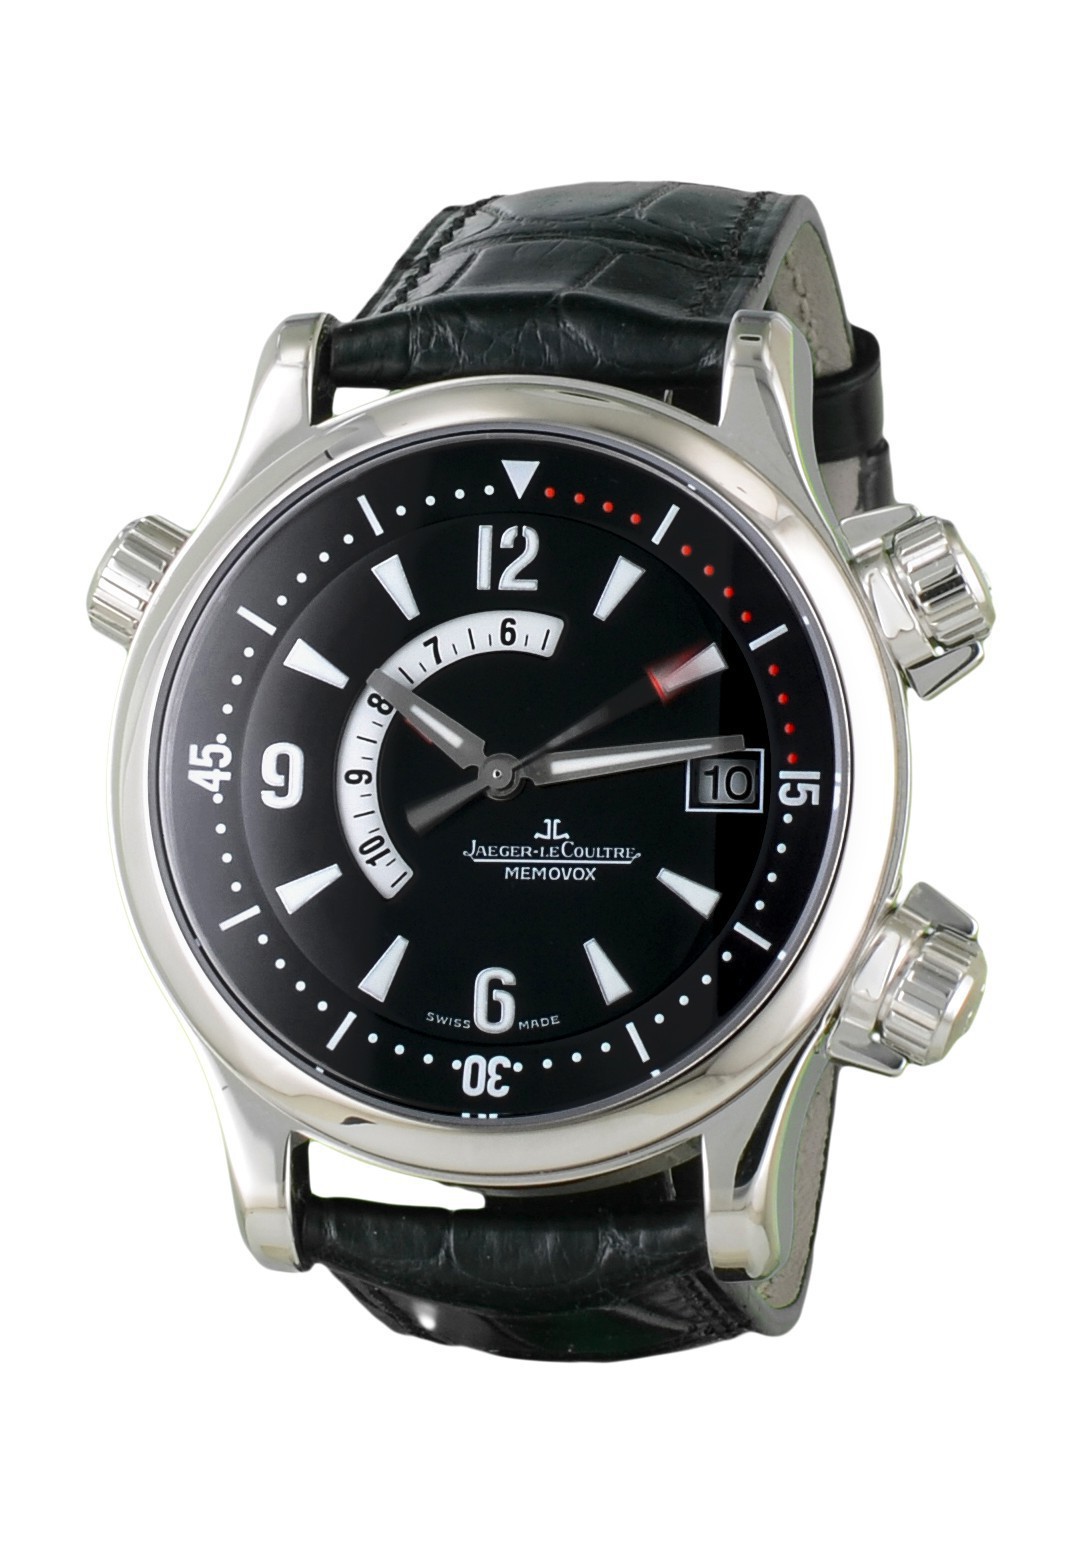 Jaeger - LeCoultre Master Compressor Memovox 42mm in Stainless Steel